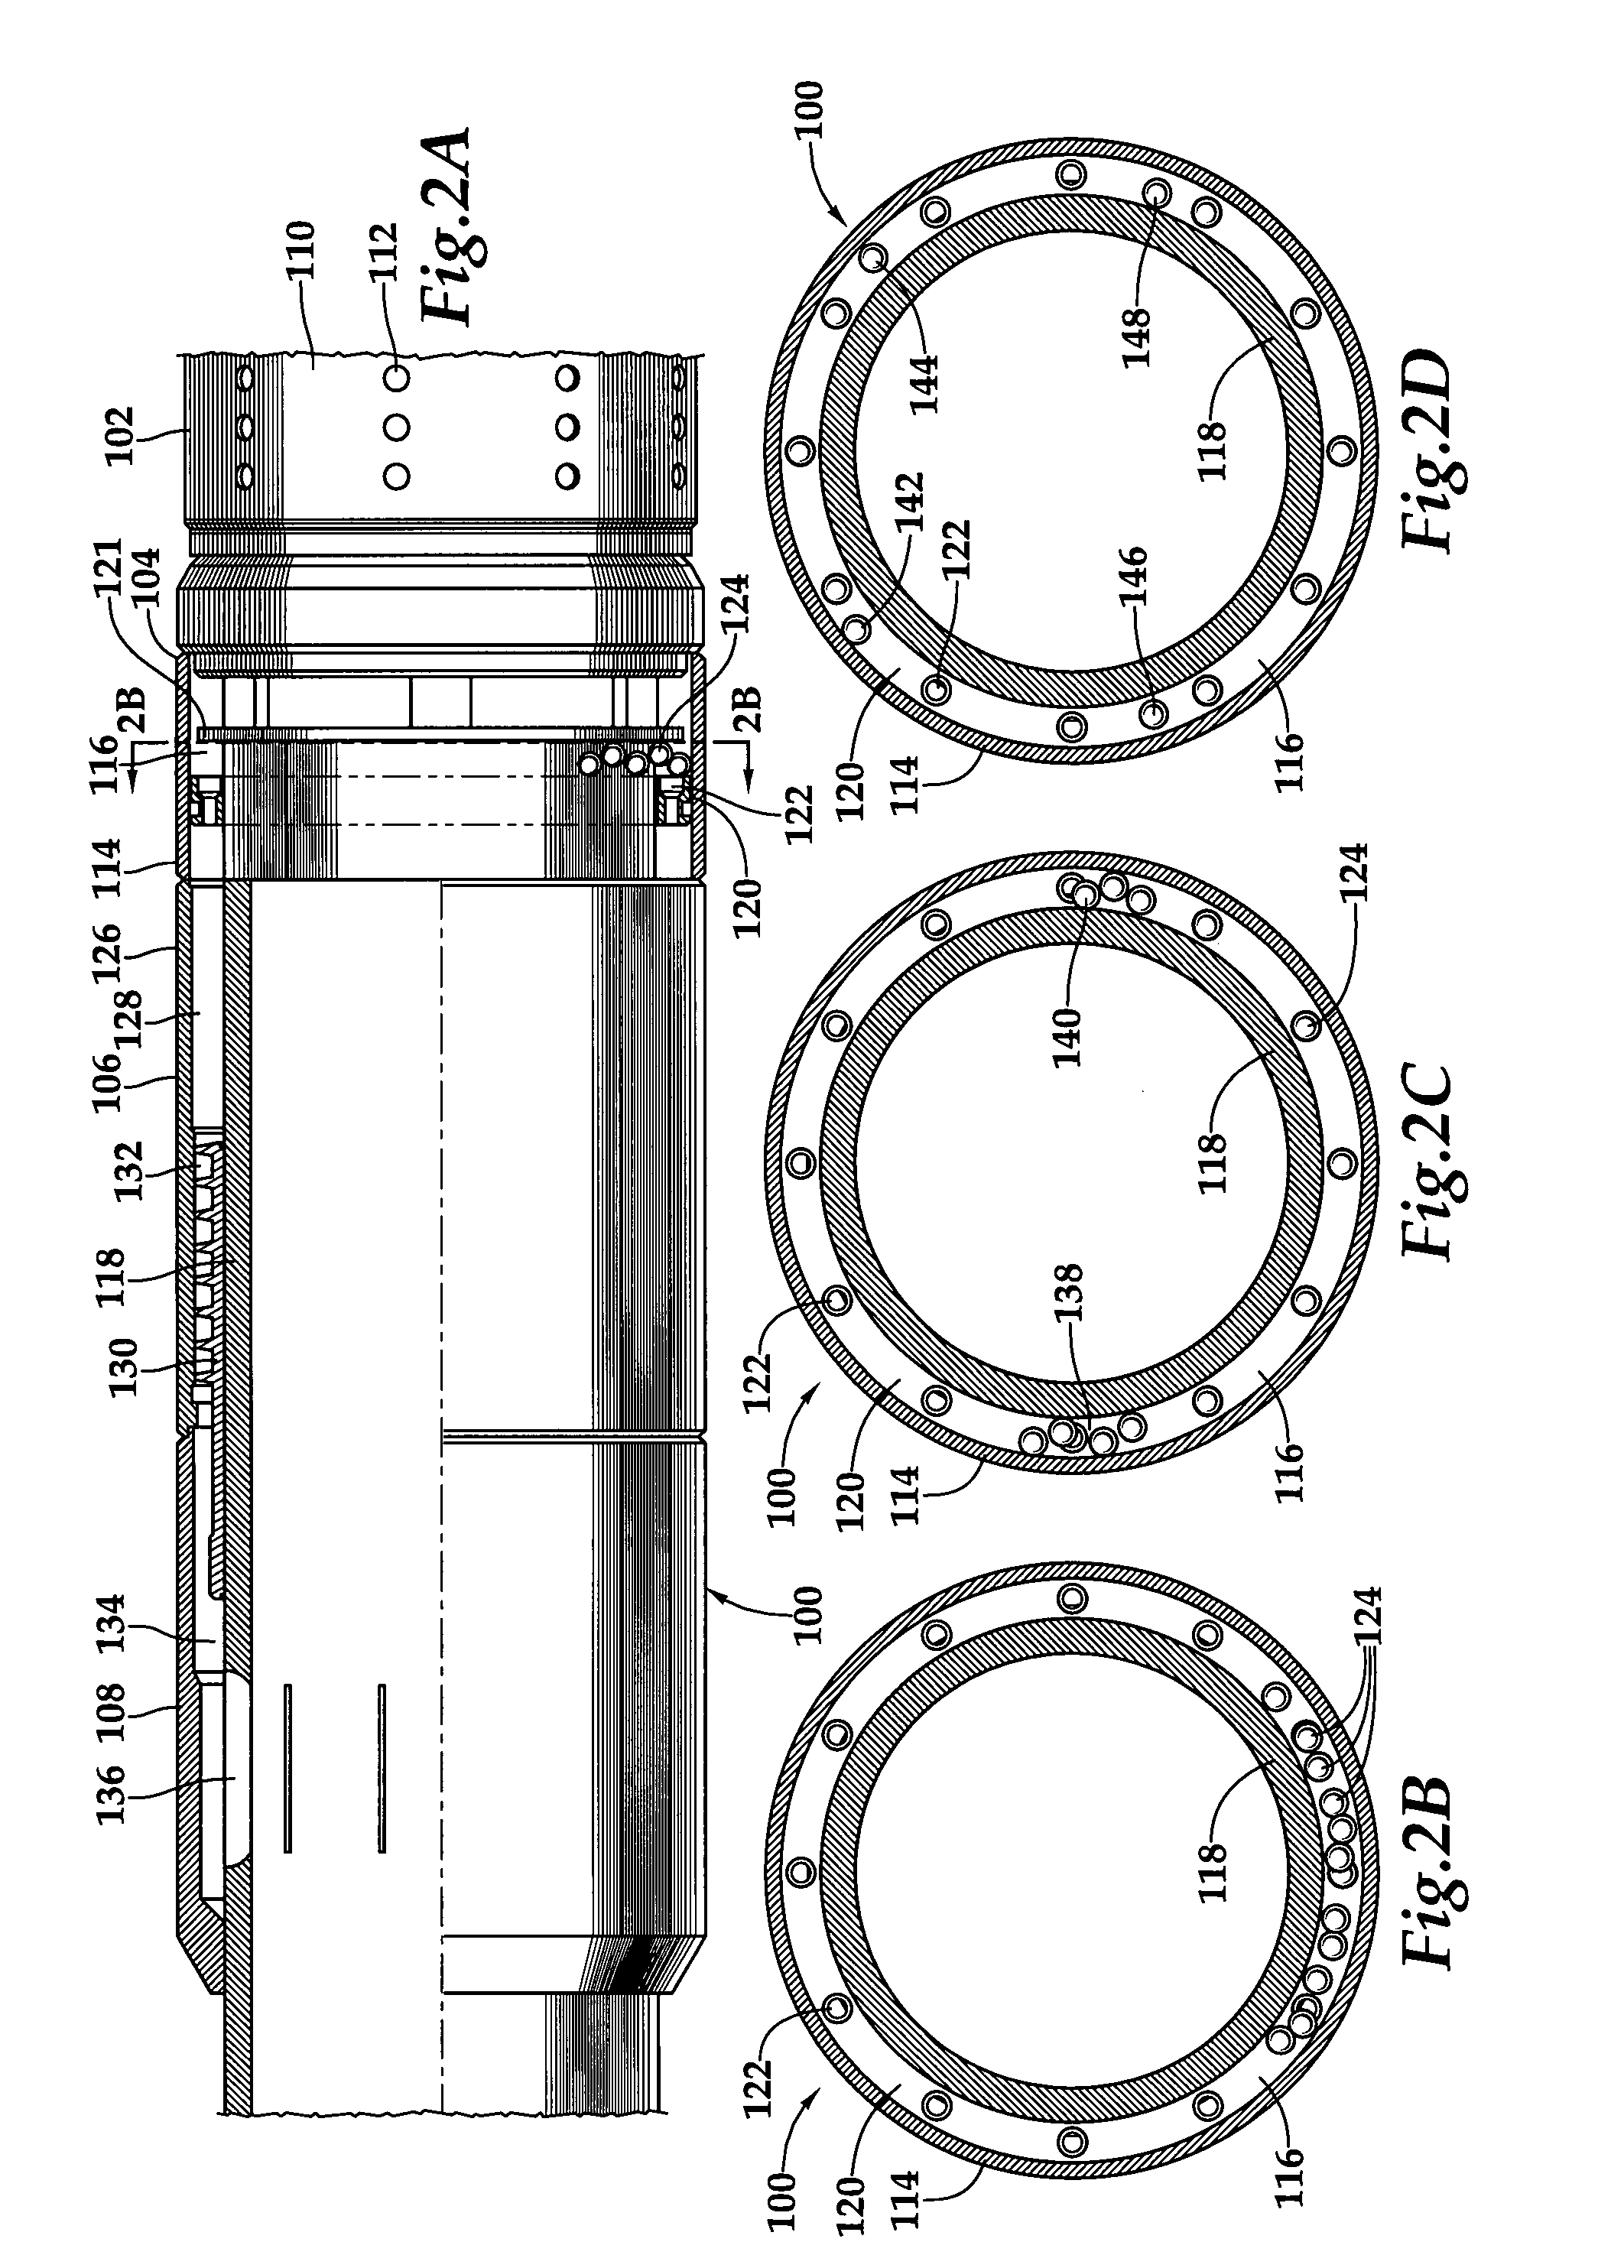 Apparatus for controlling the inflow of production fluids from a subterranean well